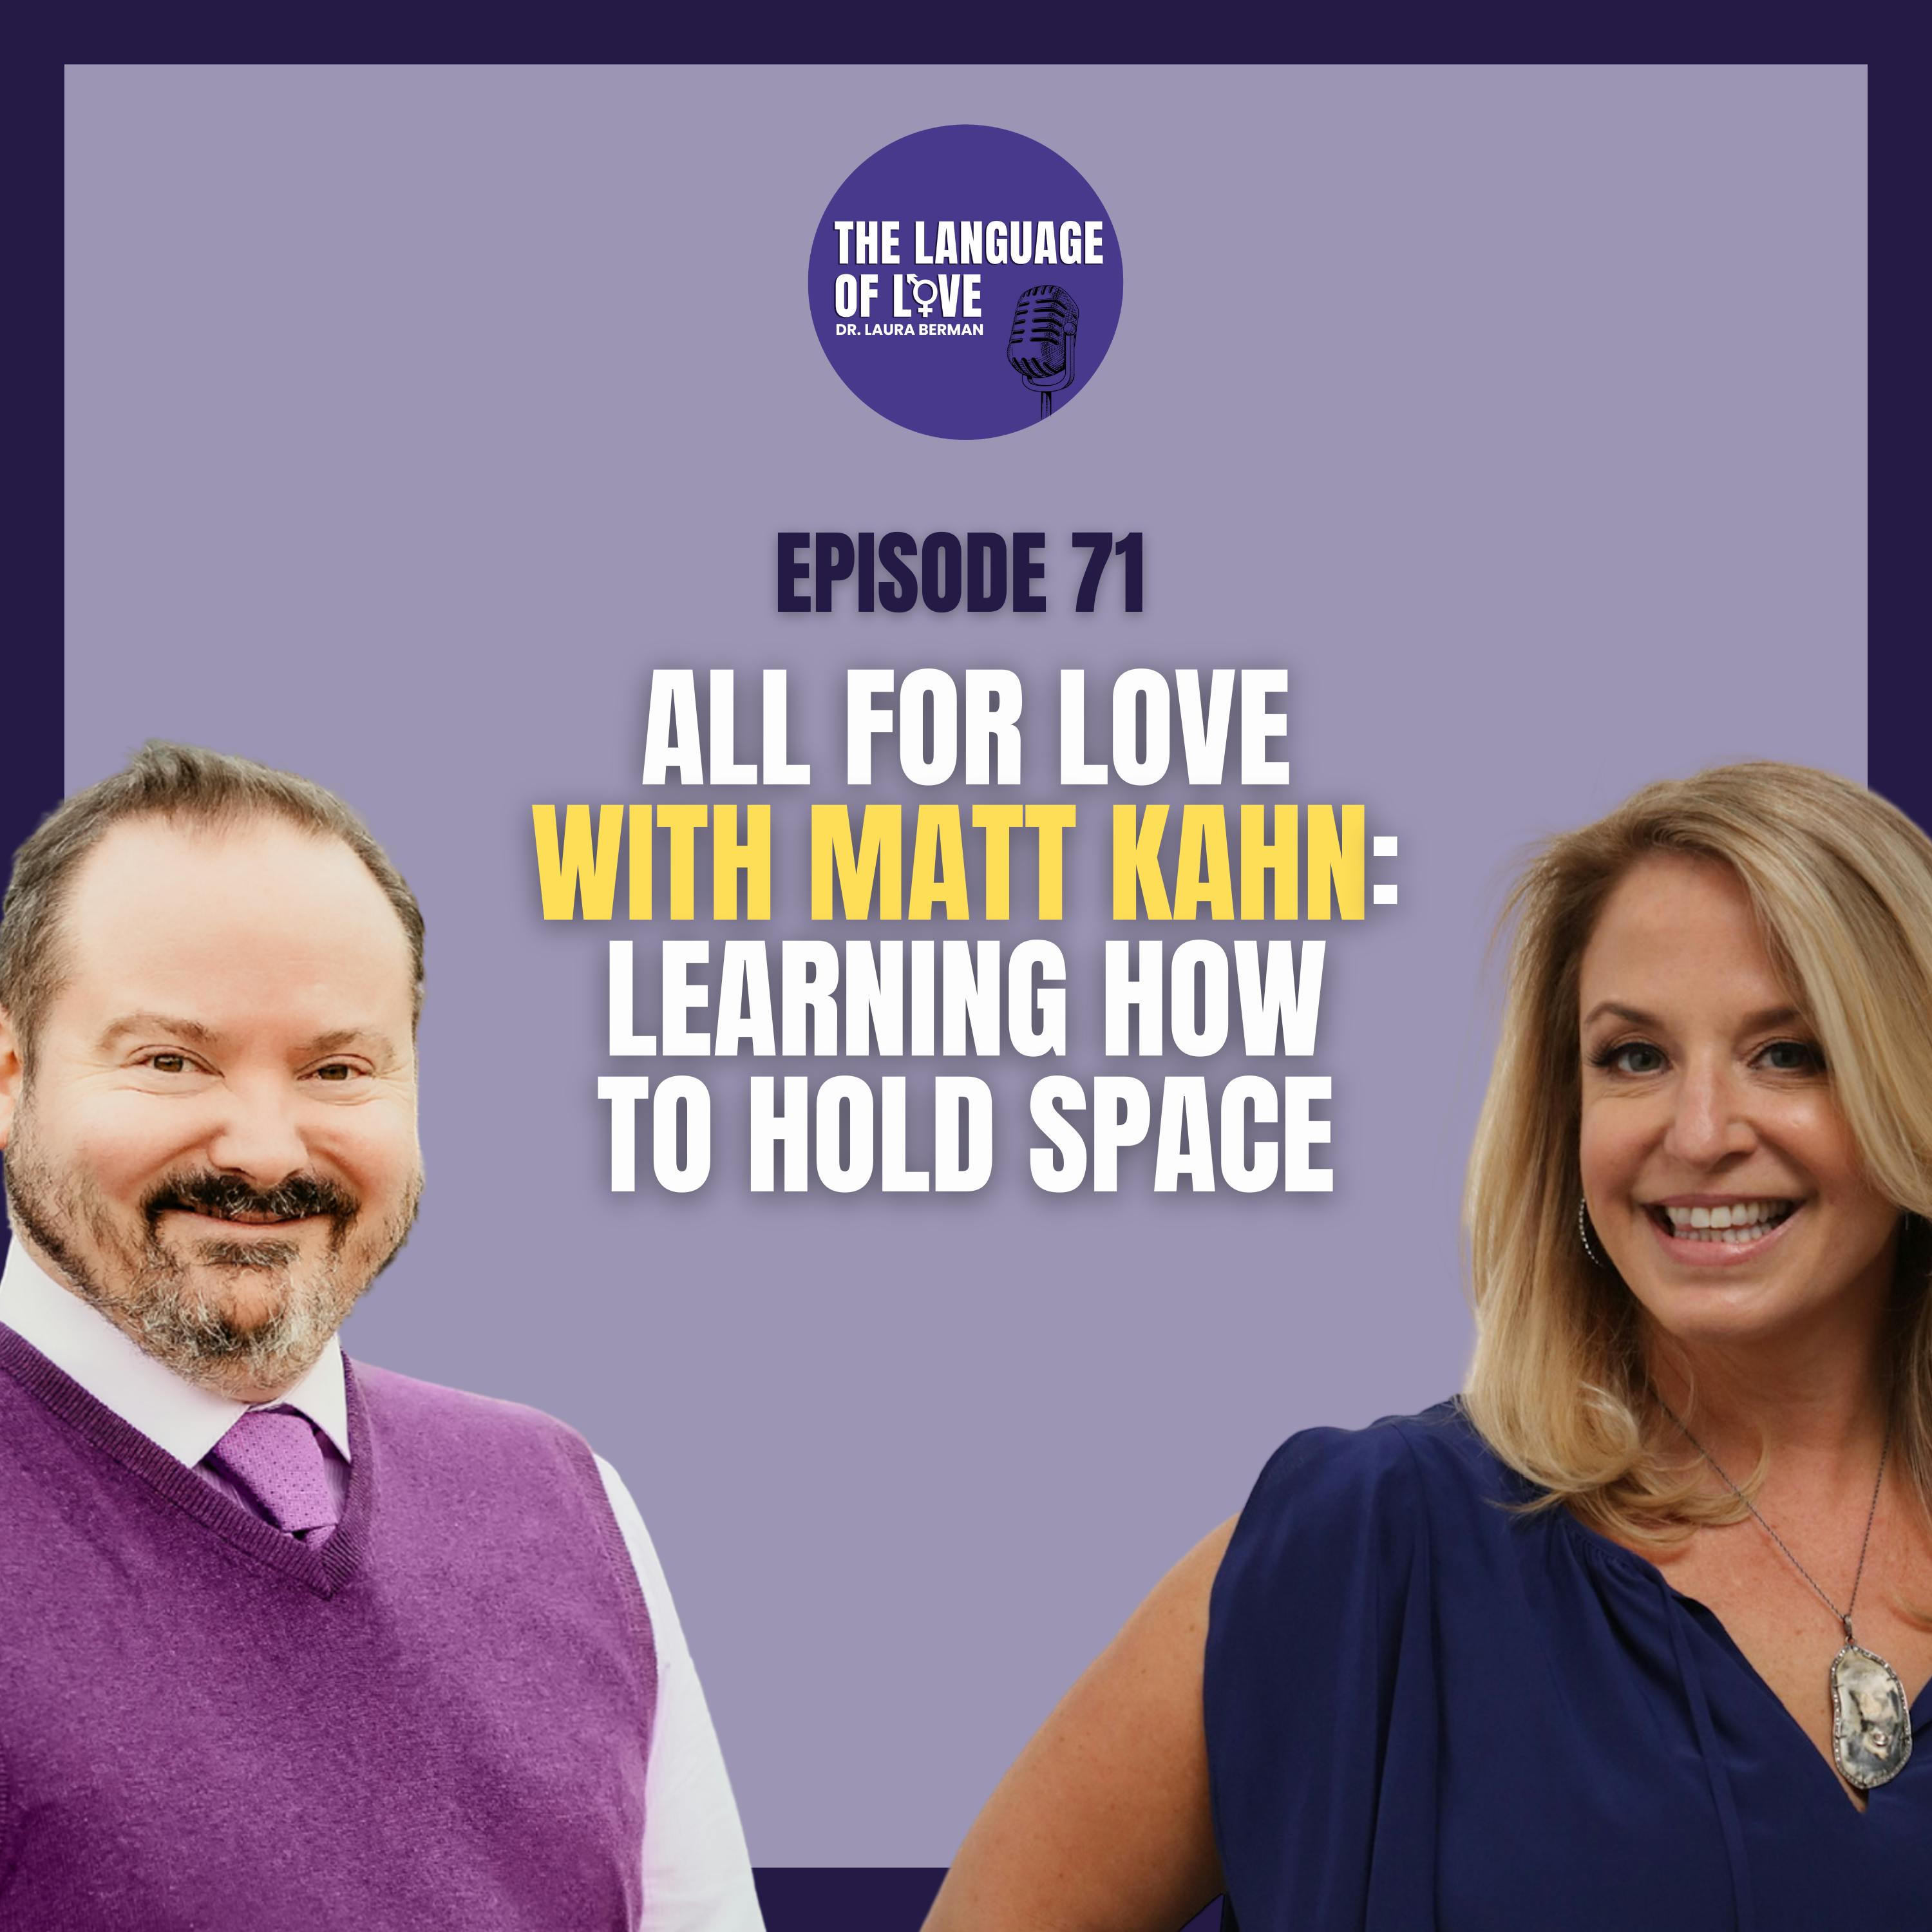 All for Love with Matt Kahn: Learning How to Hold Space